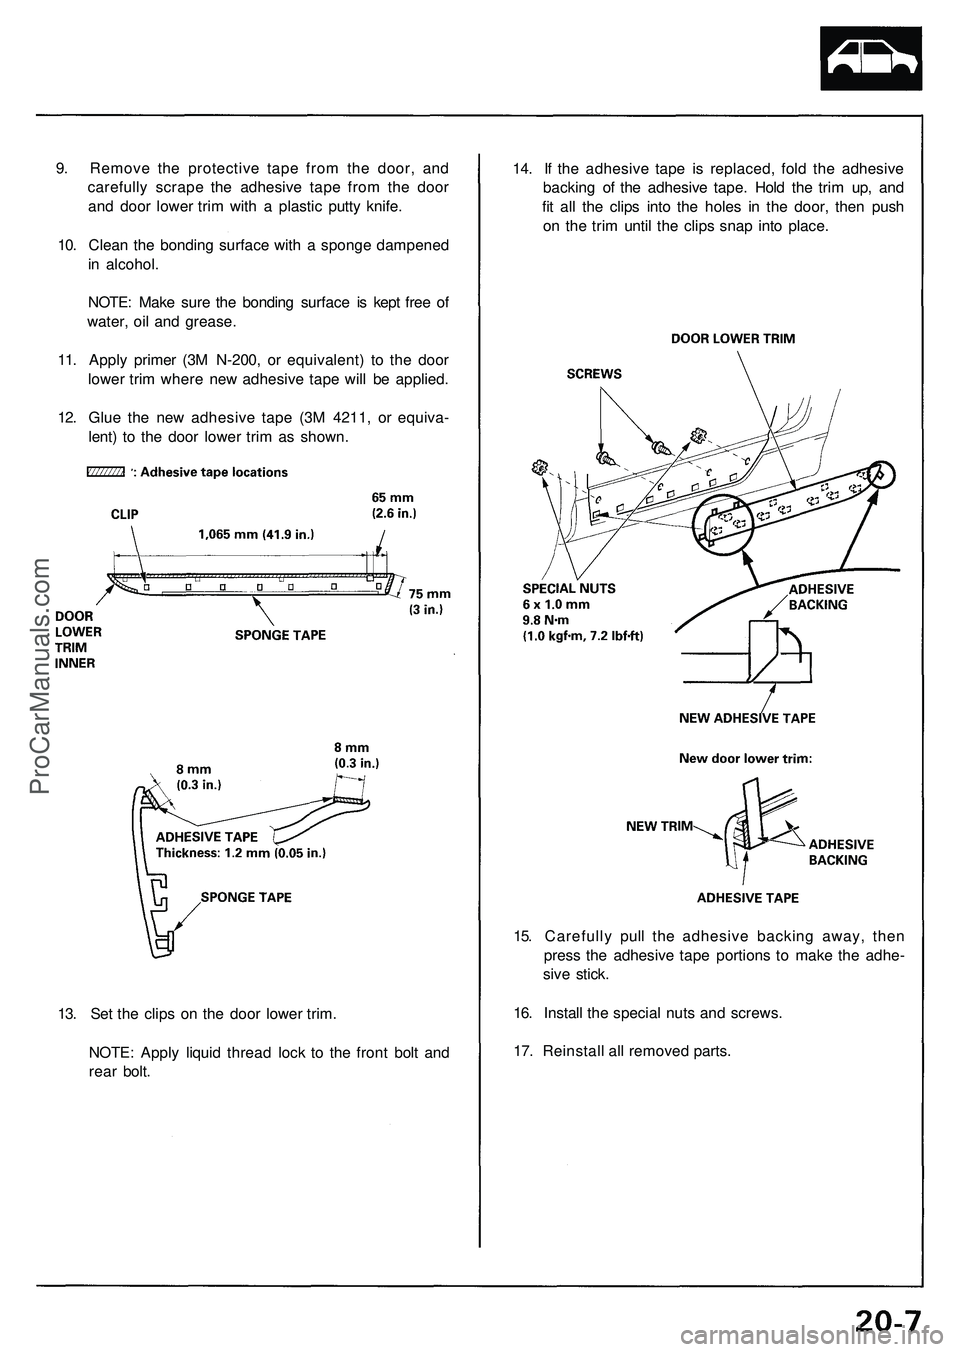 ACURA NSX 1997  Service Repair Manual 
14. If the adhesive tape is replaced, fold the adhesive

backing of the adhesive tape. Hold the trim up, and

fit all the clips into the holes in the door, then push

on the trim until the clips snap